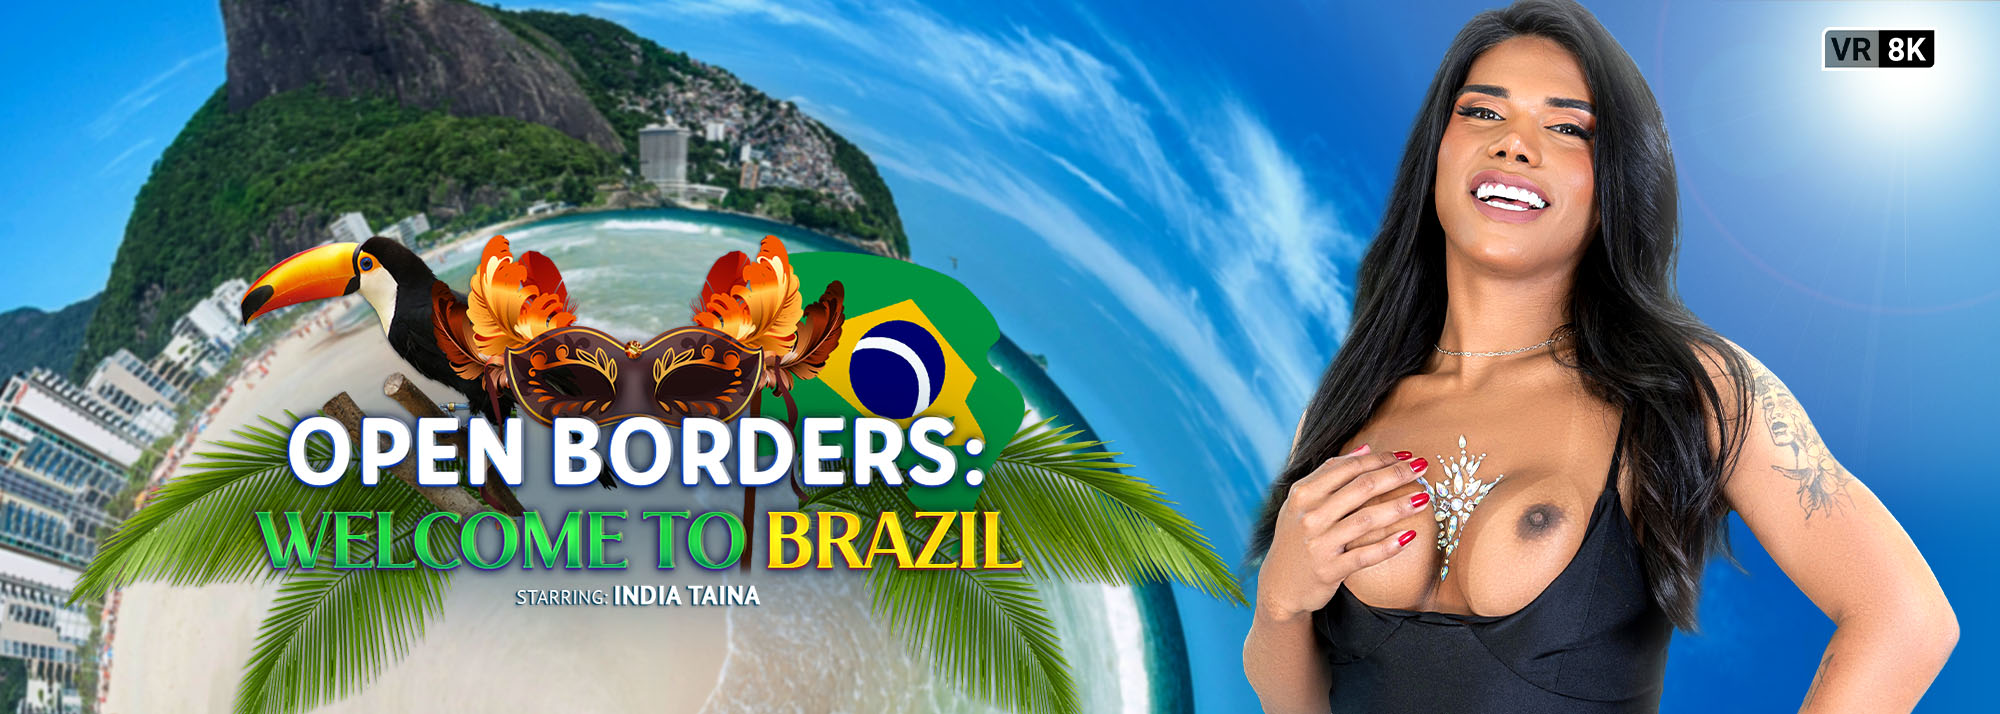 Open Borders: Welcome to Brazil - VR Porn Video, Starring: India Taina VR